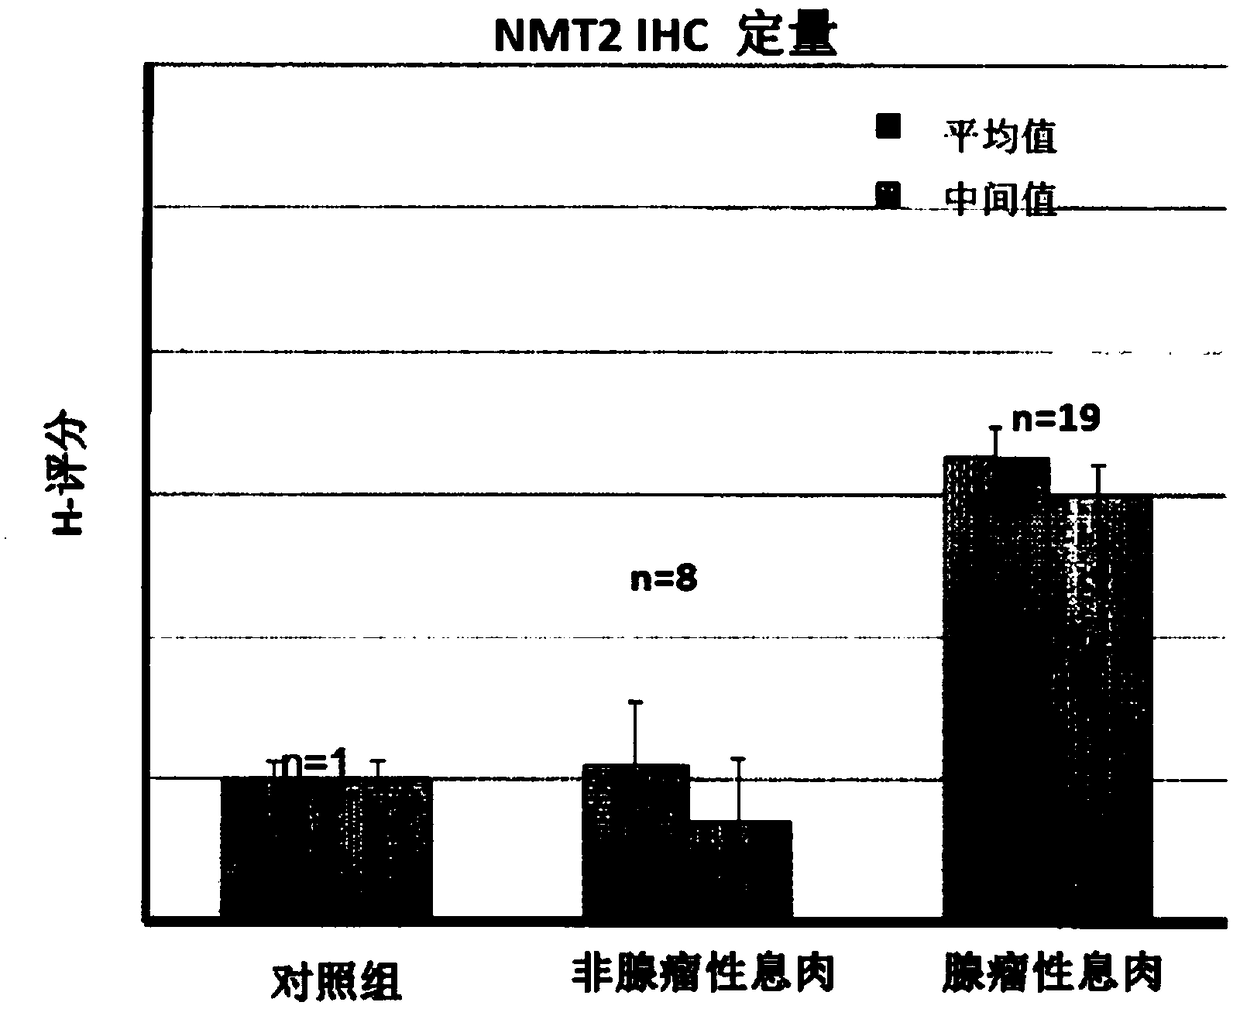 N-myristoyltransferase (NMT)1, nmt2 and methionine aminopeptidase 2 overexpression in peripheral blood and peripheral blood mononuclear cells is a marker for adenomatous polyps and early detection of colorectal cancer